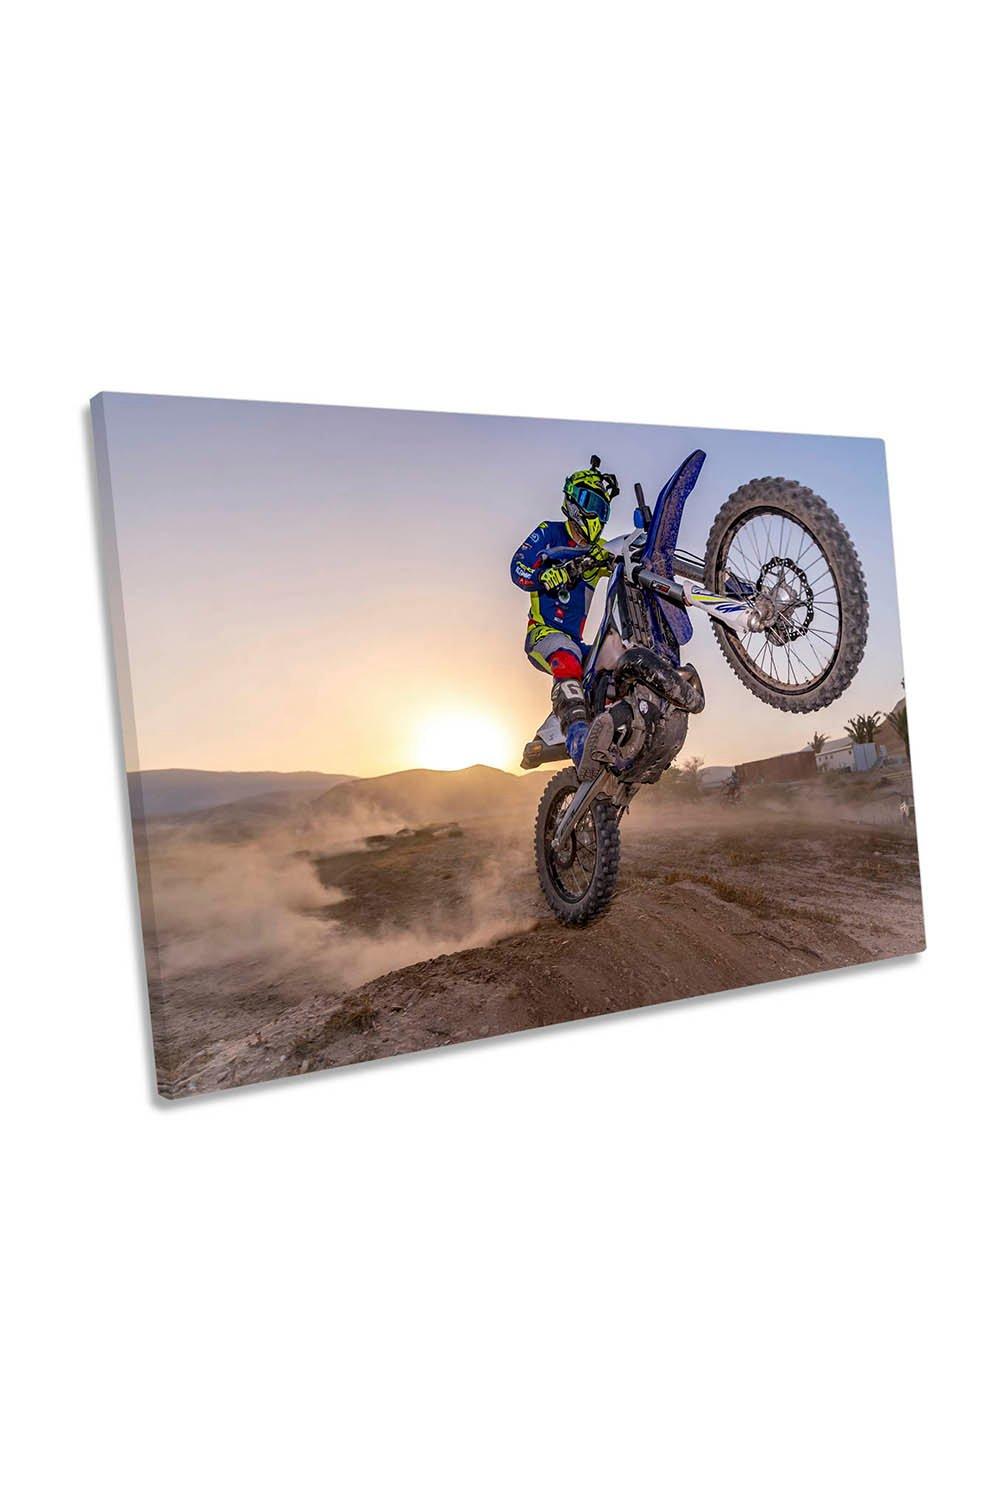 Jump Like Mario Motocross Extreme Sports Canvas Wall Art Picture Print